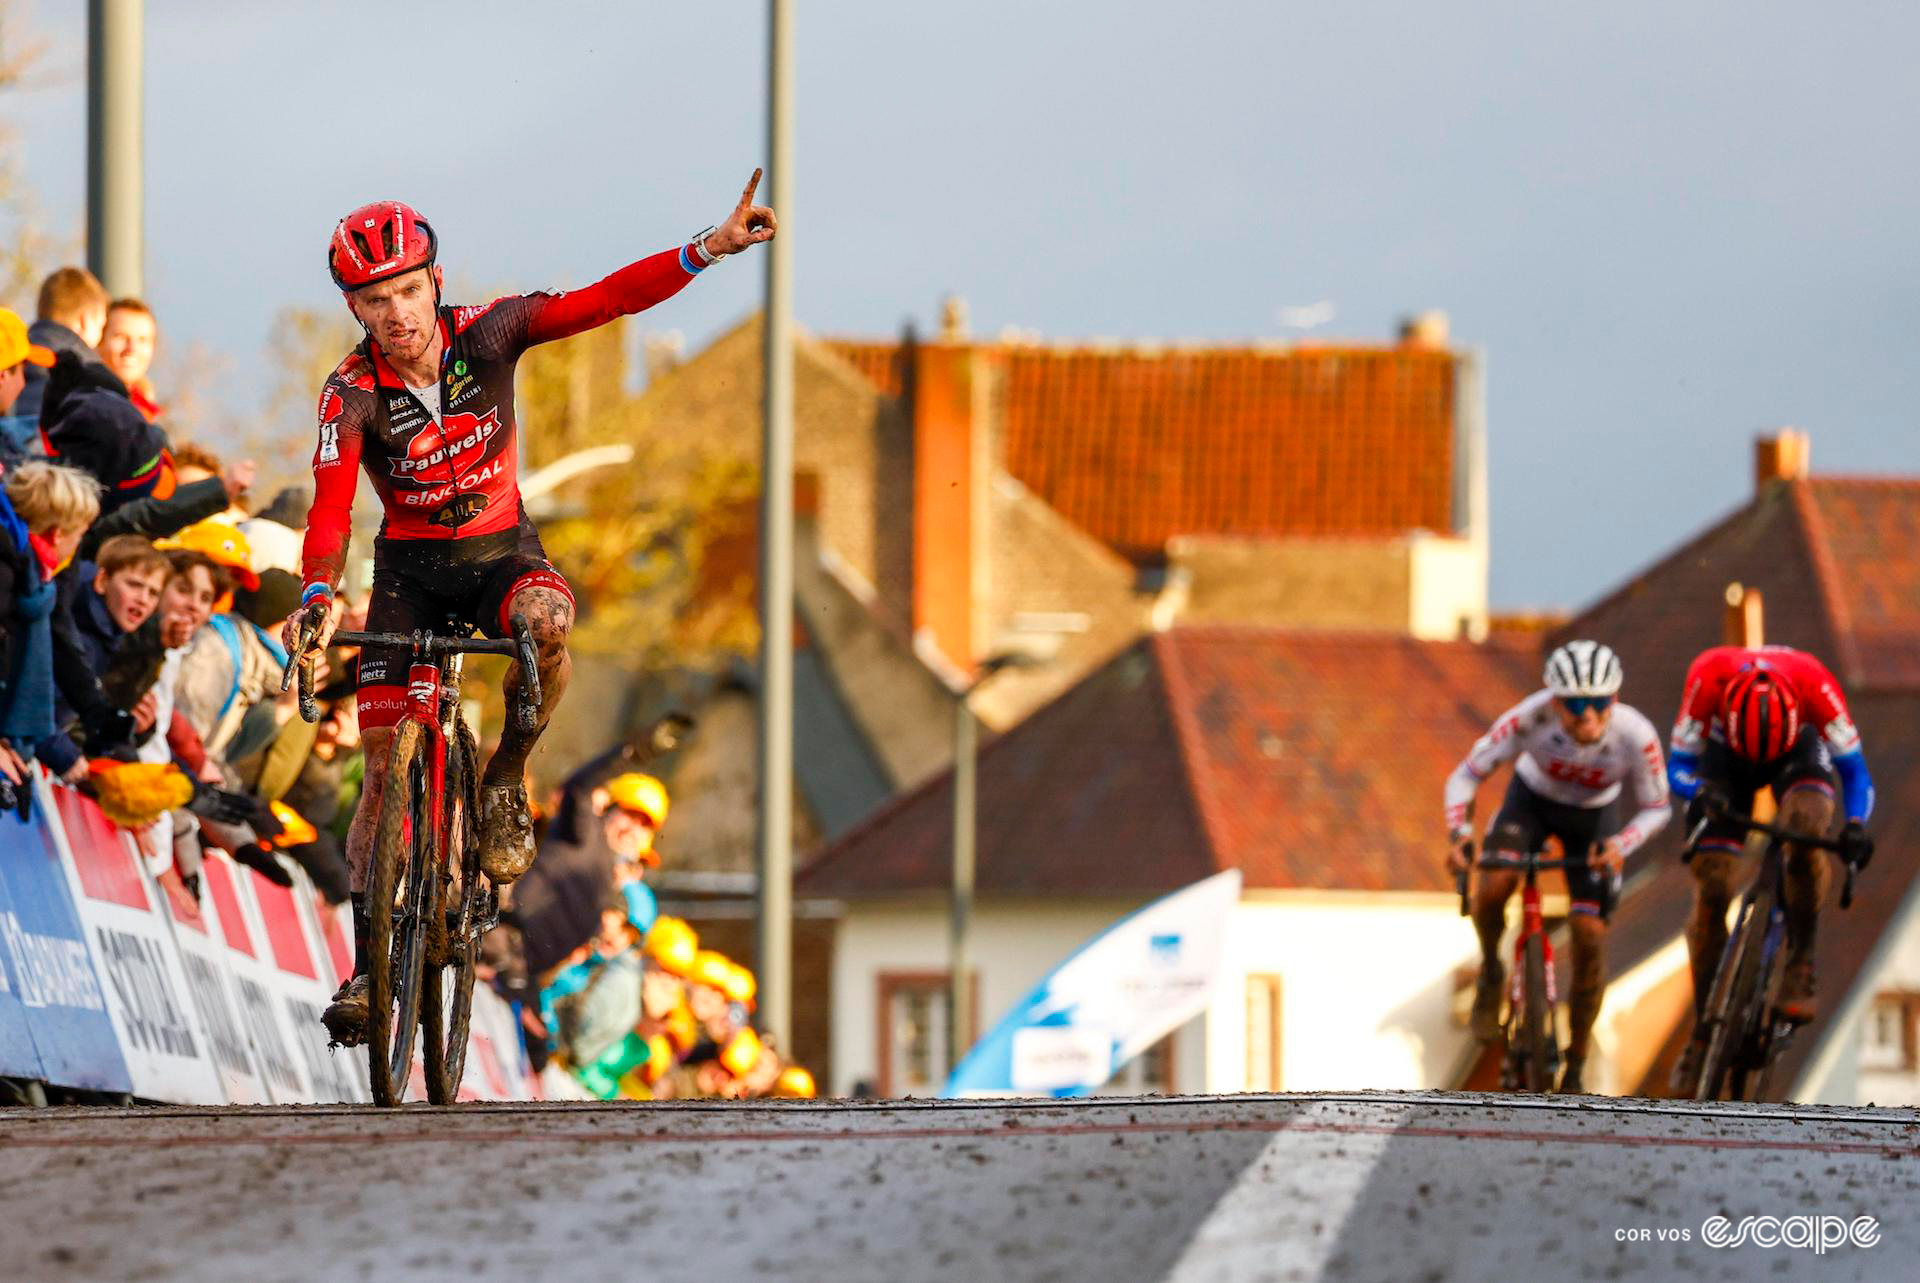 With the sun almost set, Eli Iserbyt reaches the finish line with one finger pointed skyward in celebration as Lars van der Haar and Cameron Mason sprint for second just behind.